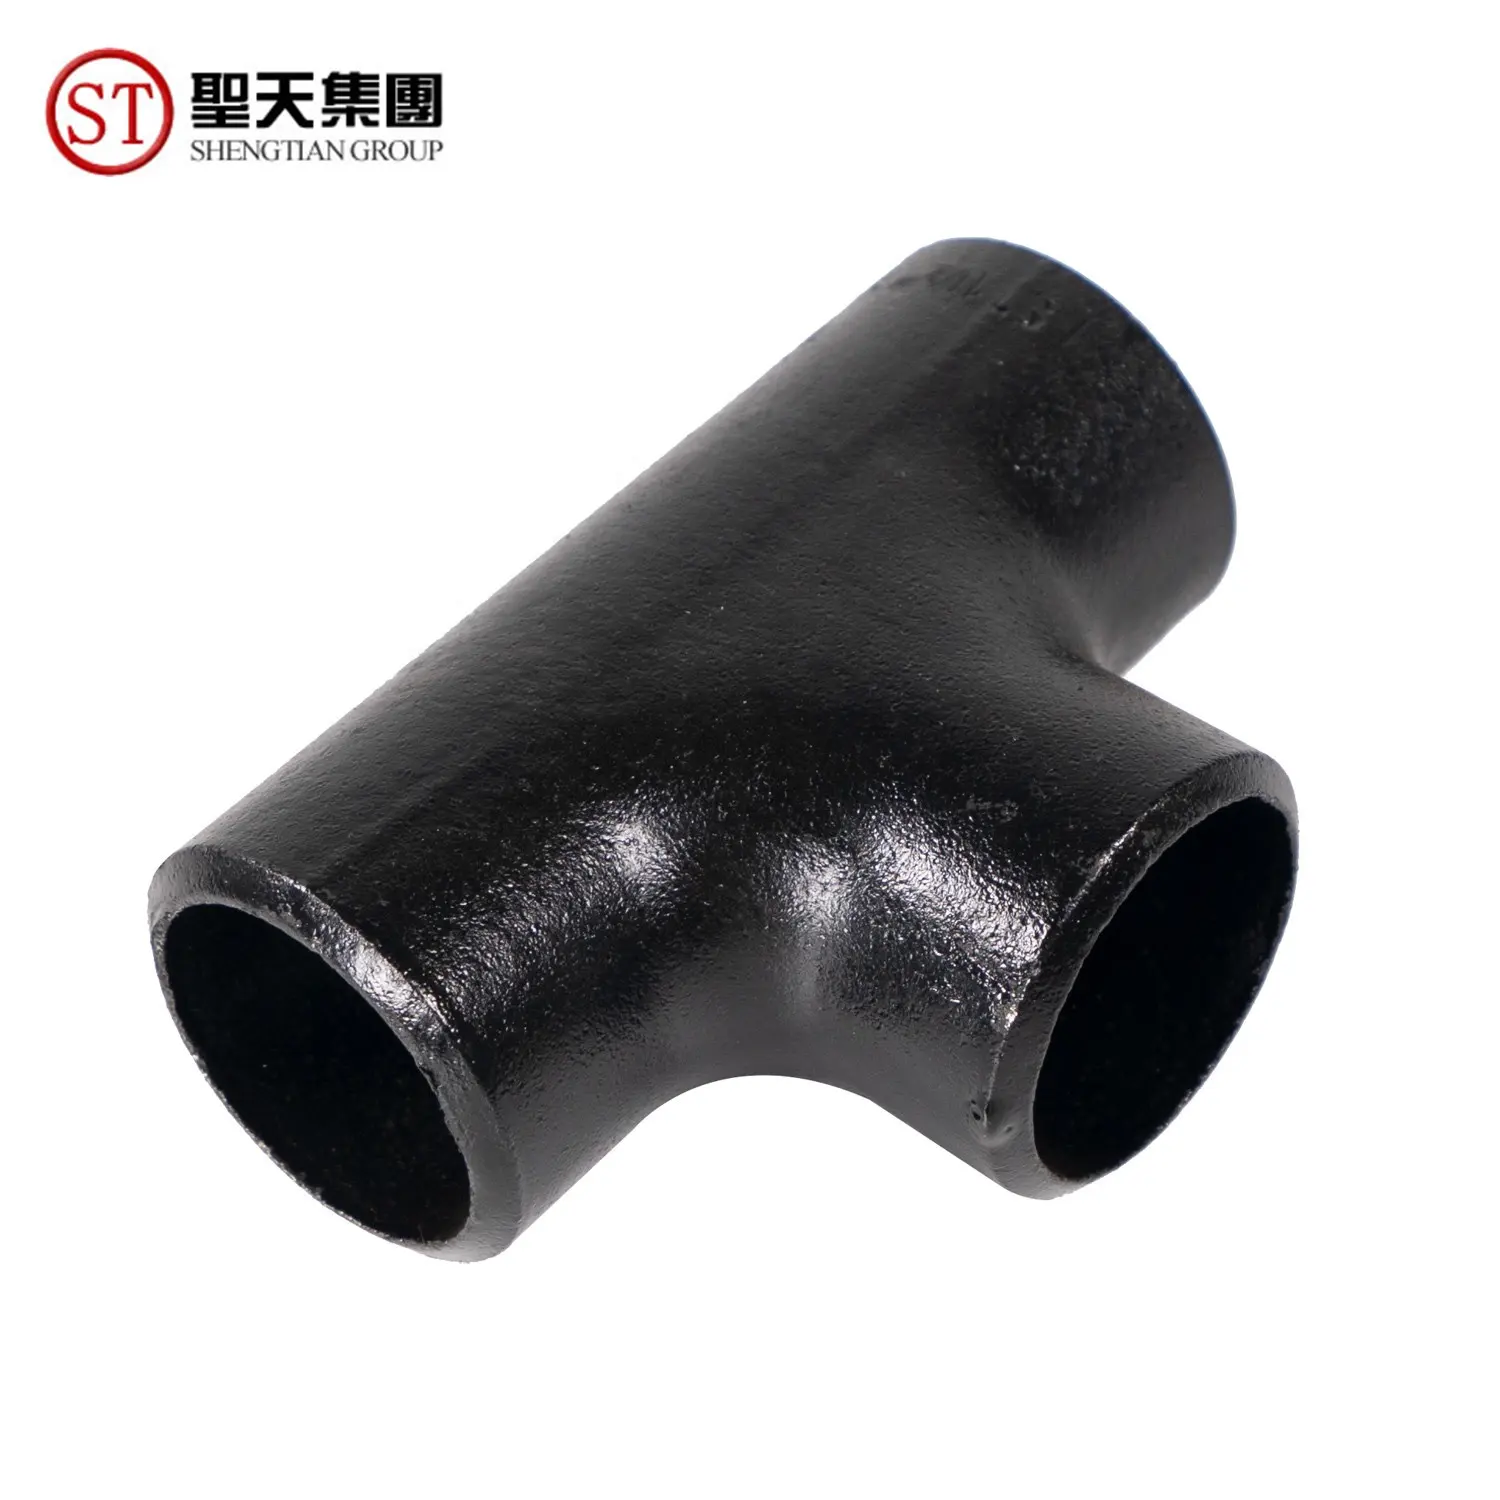 DIN carbon steel pipe fititng equal tee A234wpb black tee dn15-dn12000 std sch40 reducing tee